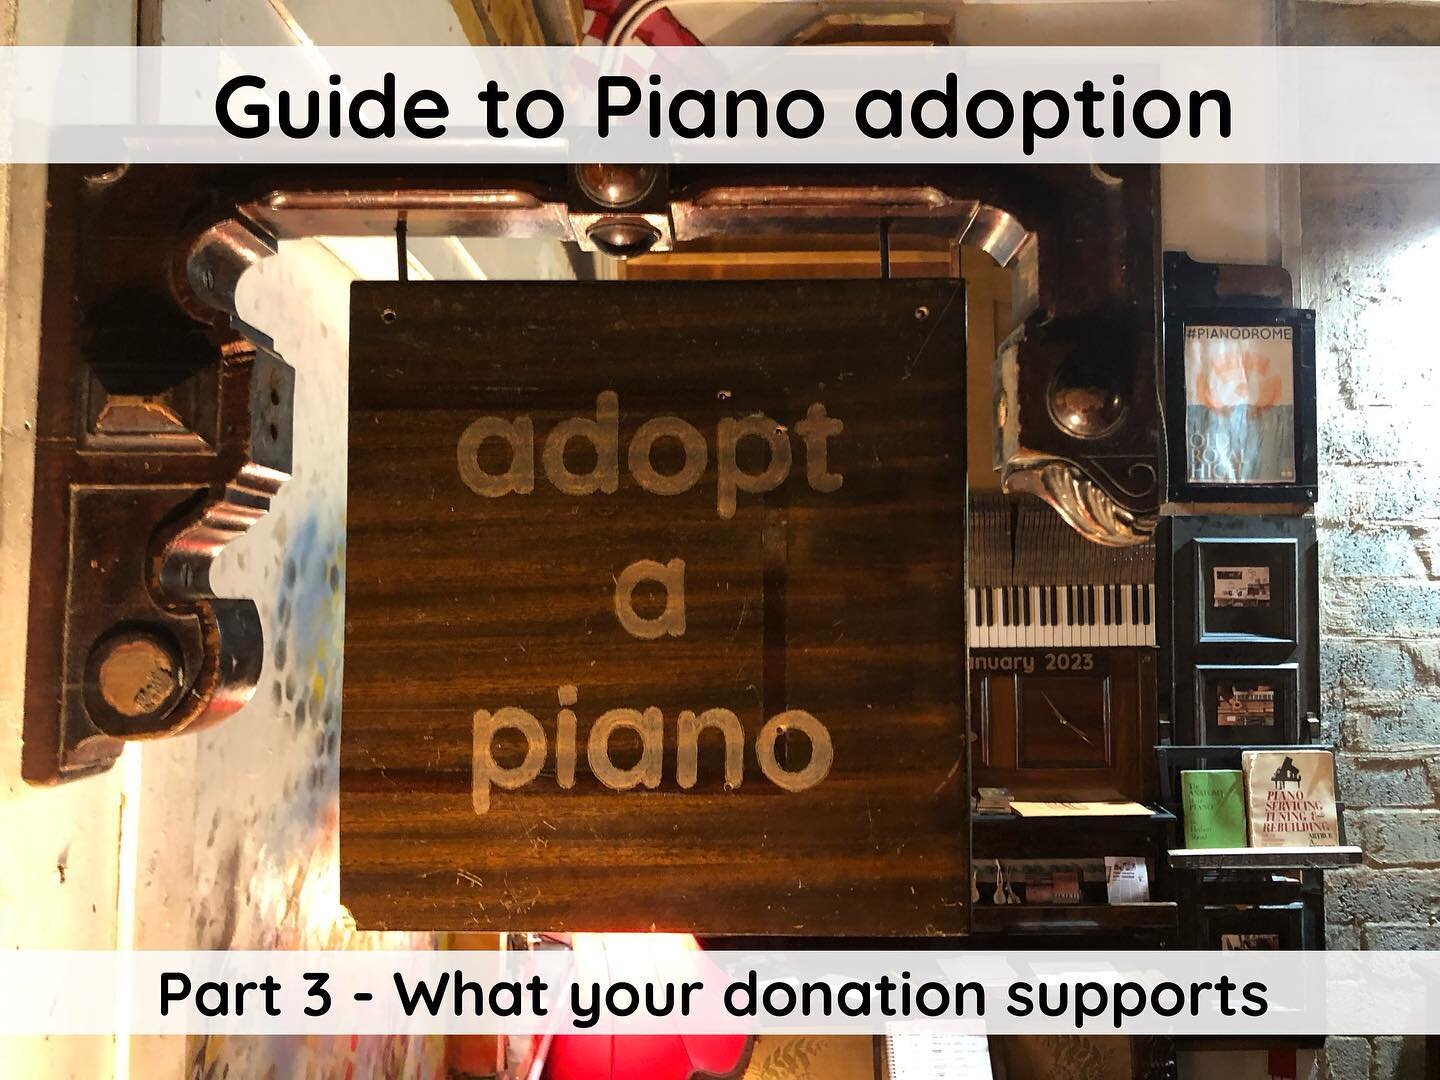 If you&rsquo;ve heard of our Adopt a Piano scheme, you might have many questions about how it all works&hellip; Here is part 3 of 3 of our Guide to Piano adoption: a breakdown of how to adopt a piano and an introduction to the work our team and volun